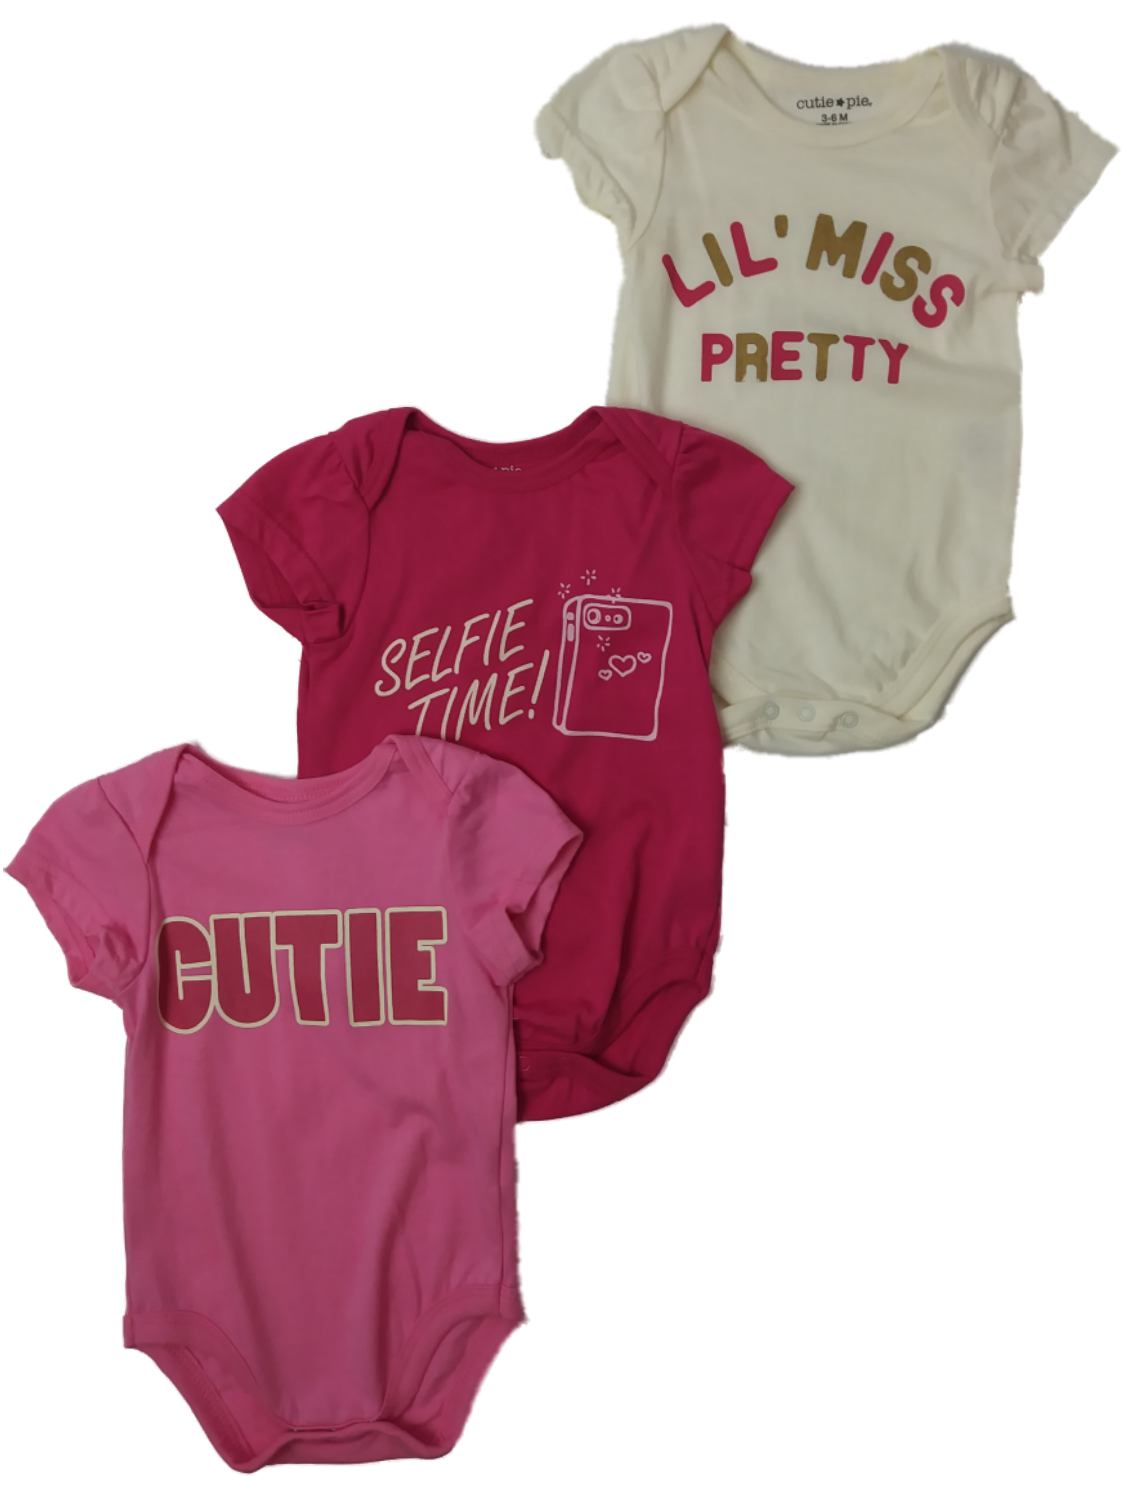 Carter's Carters Infant Girls Pink Lil Miss Pretty Slefie Time Outfit 3pc Bodysuit Set